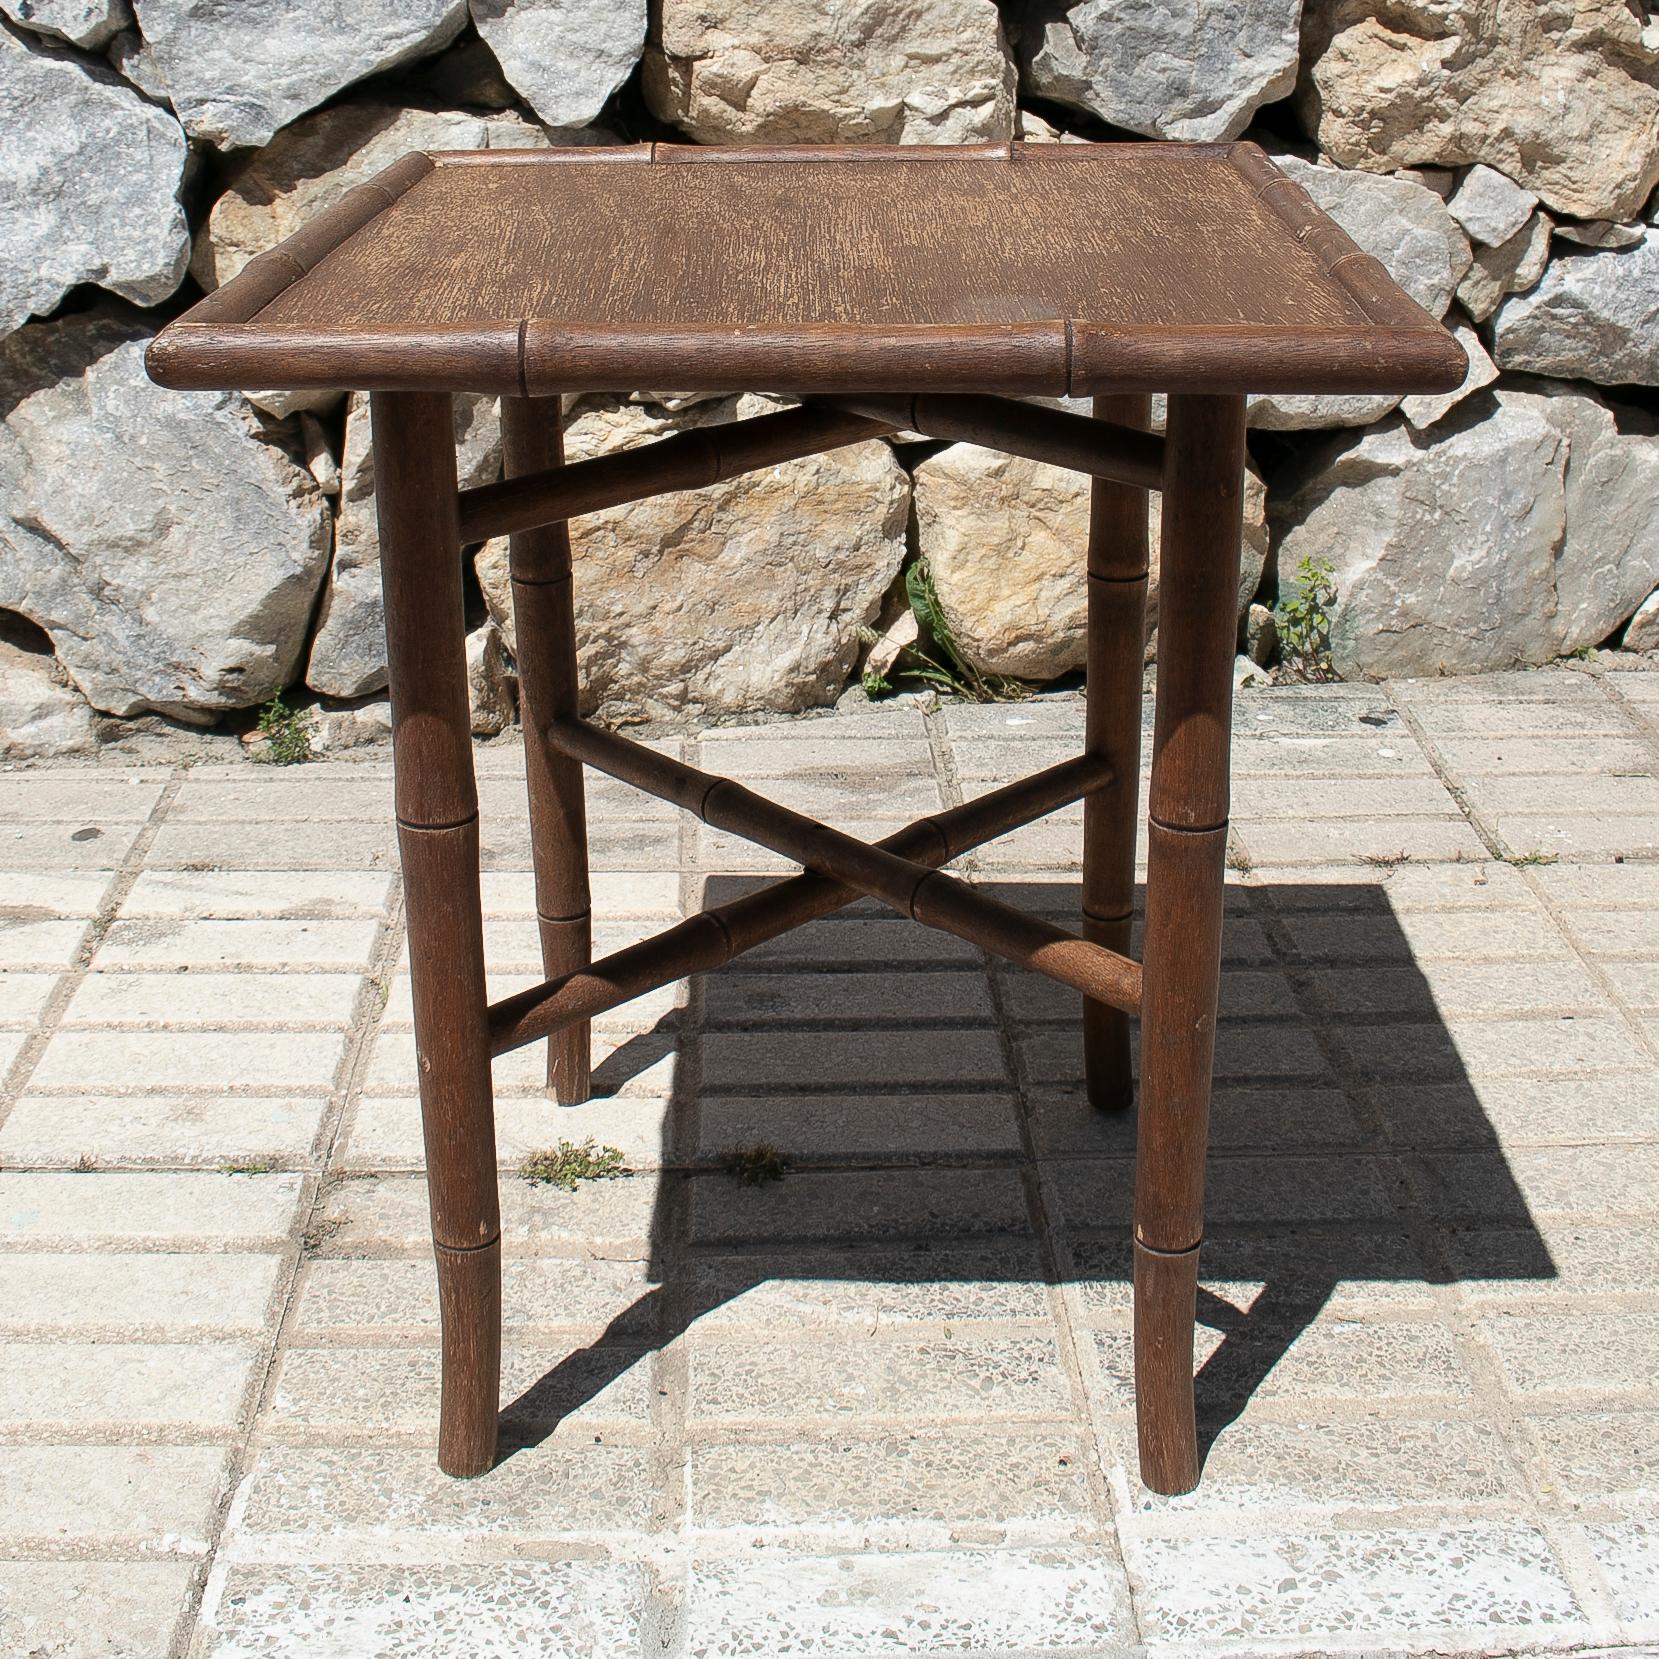 Vintage 1970s Spanish faux bamboo wooden side table.